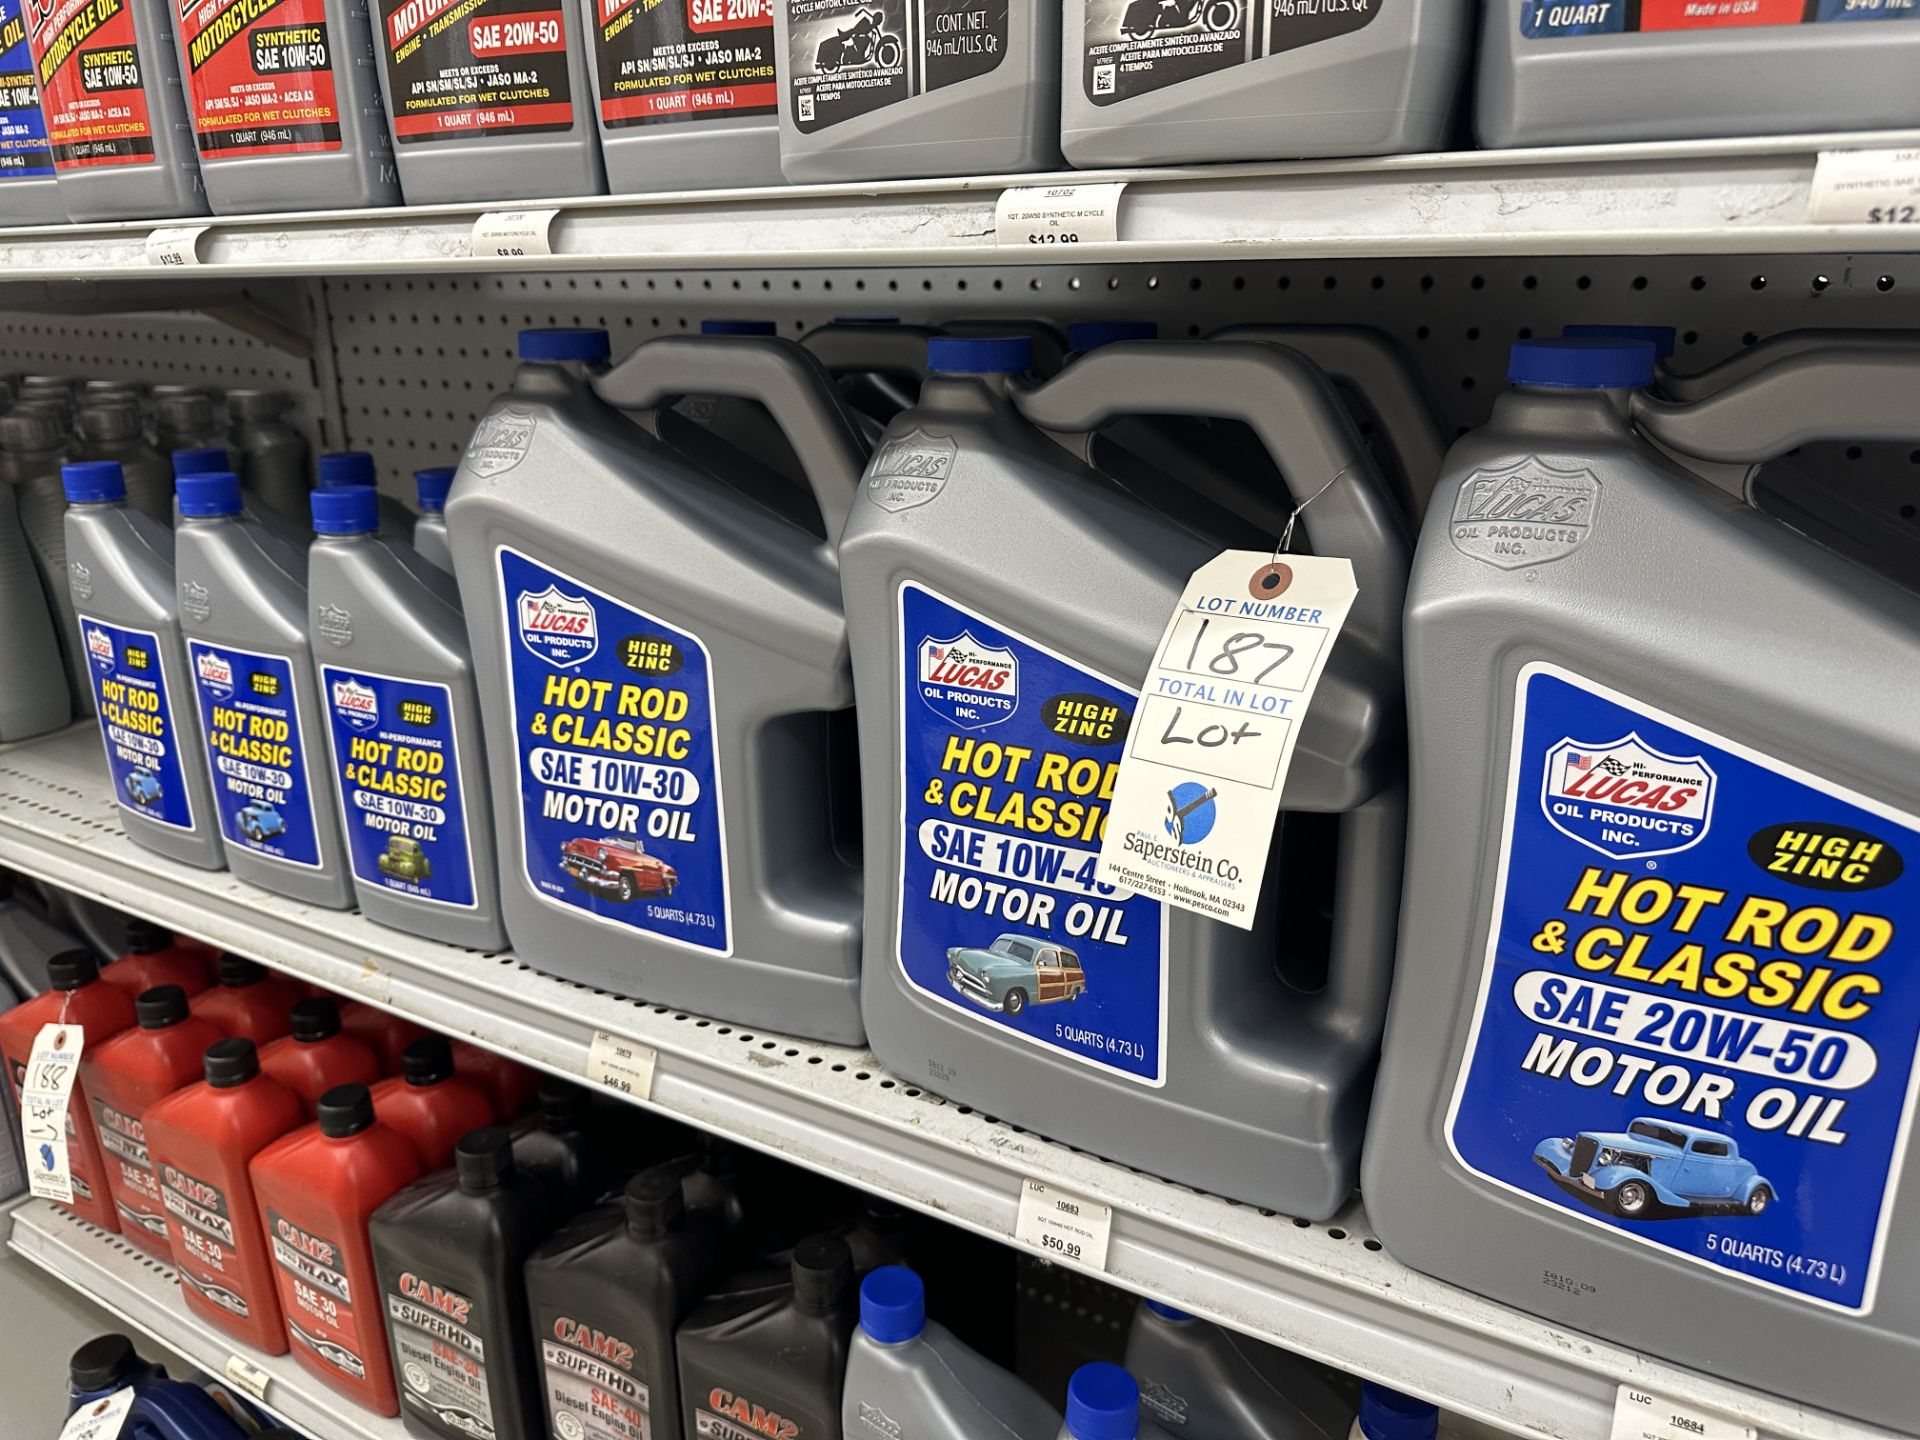 {LOT} 7 Gallon & 6 Quart Lucas Hot Rod & Classic Motor Oil 10W-30, 10W-40 & 20W-50 (BEING SOLD BY